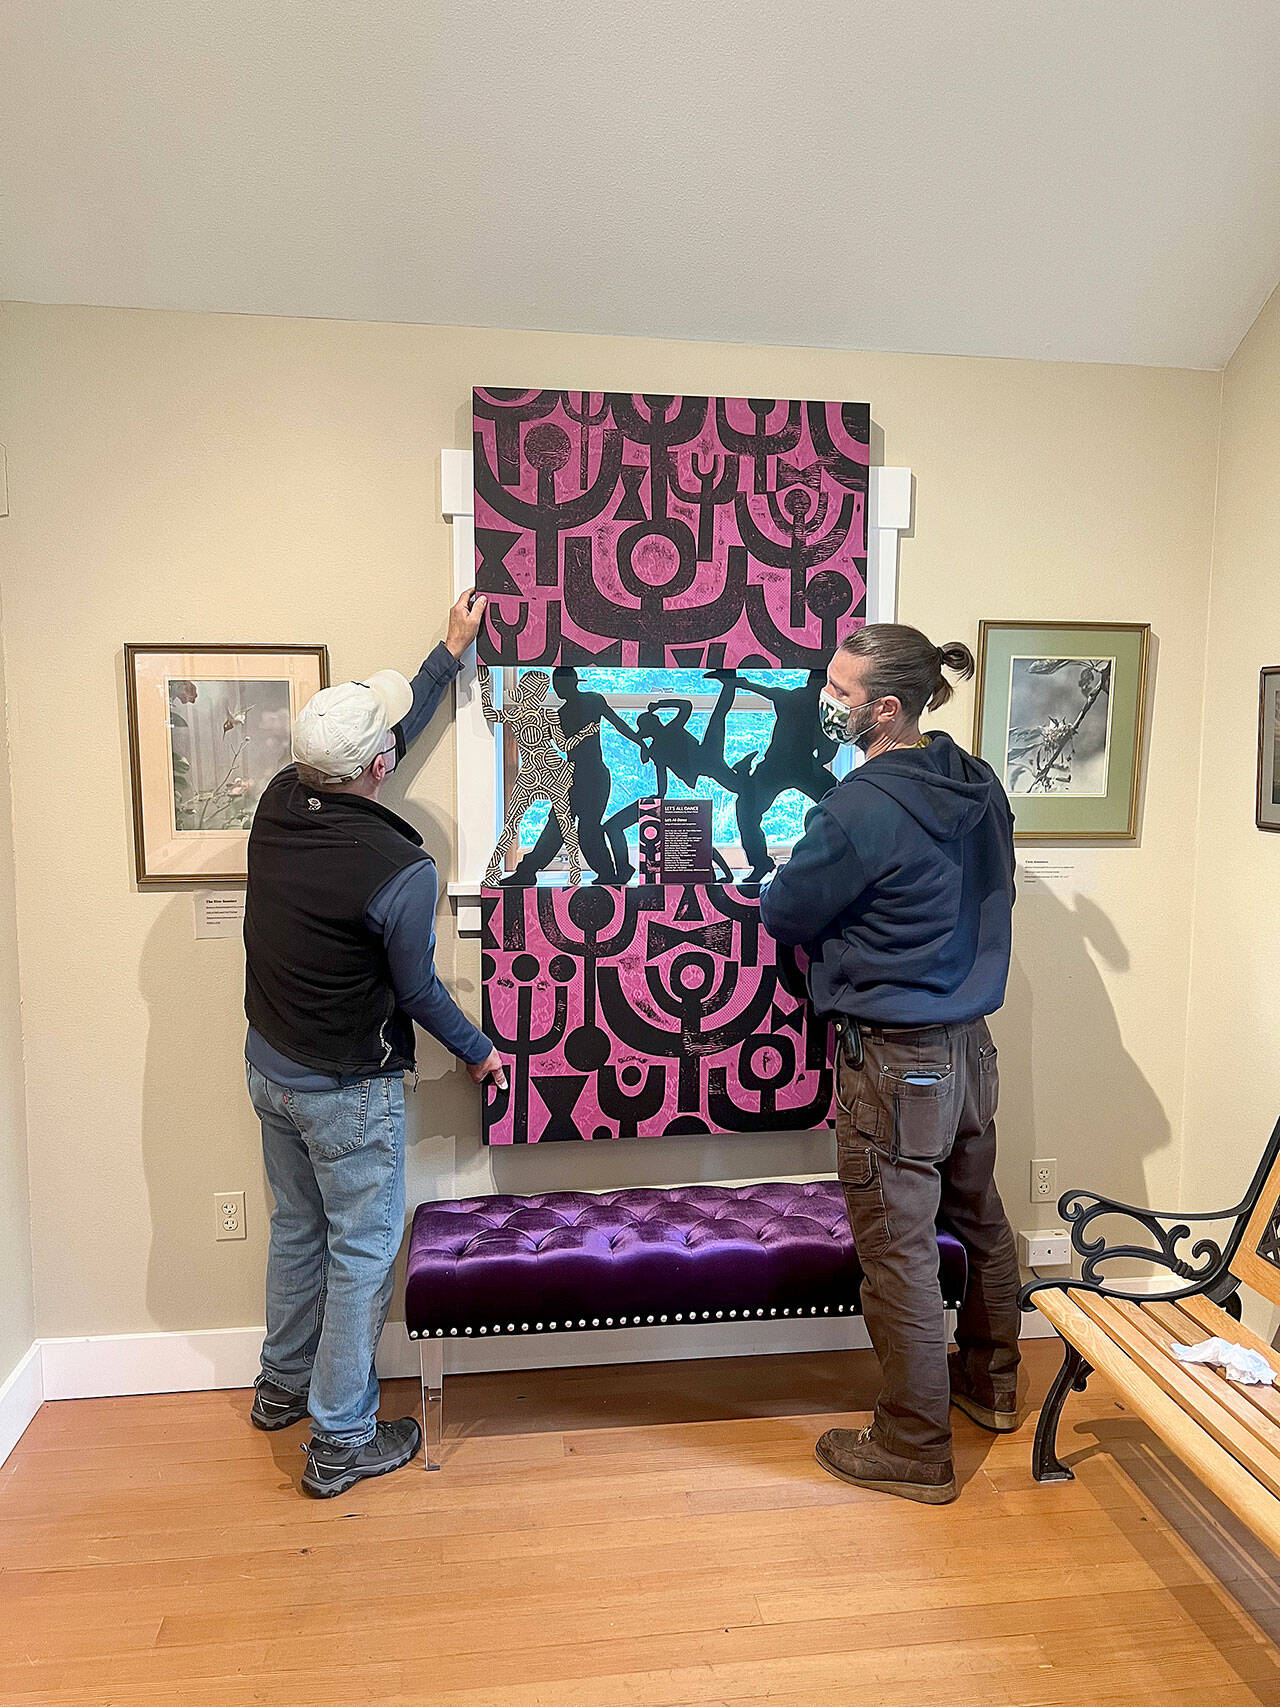 (Courtesy Photo) Bob Katica and Walker Dodson install “Let’s Dance,” a wood carving by Brian Fisher that was included in Vashon Heritage Museum’s award-winning exhibition, “In and Out: Being LGBTQ on Vashon.” The artwork is included in the museum’s online auction, running June 11 to 25.